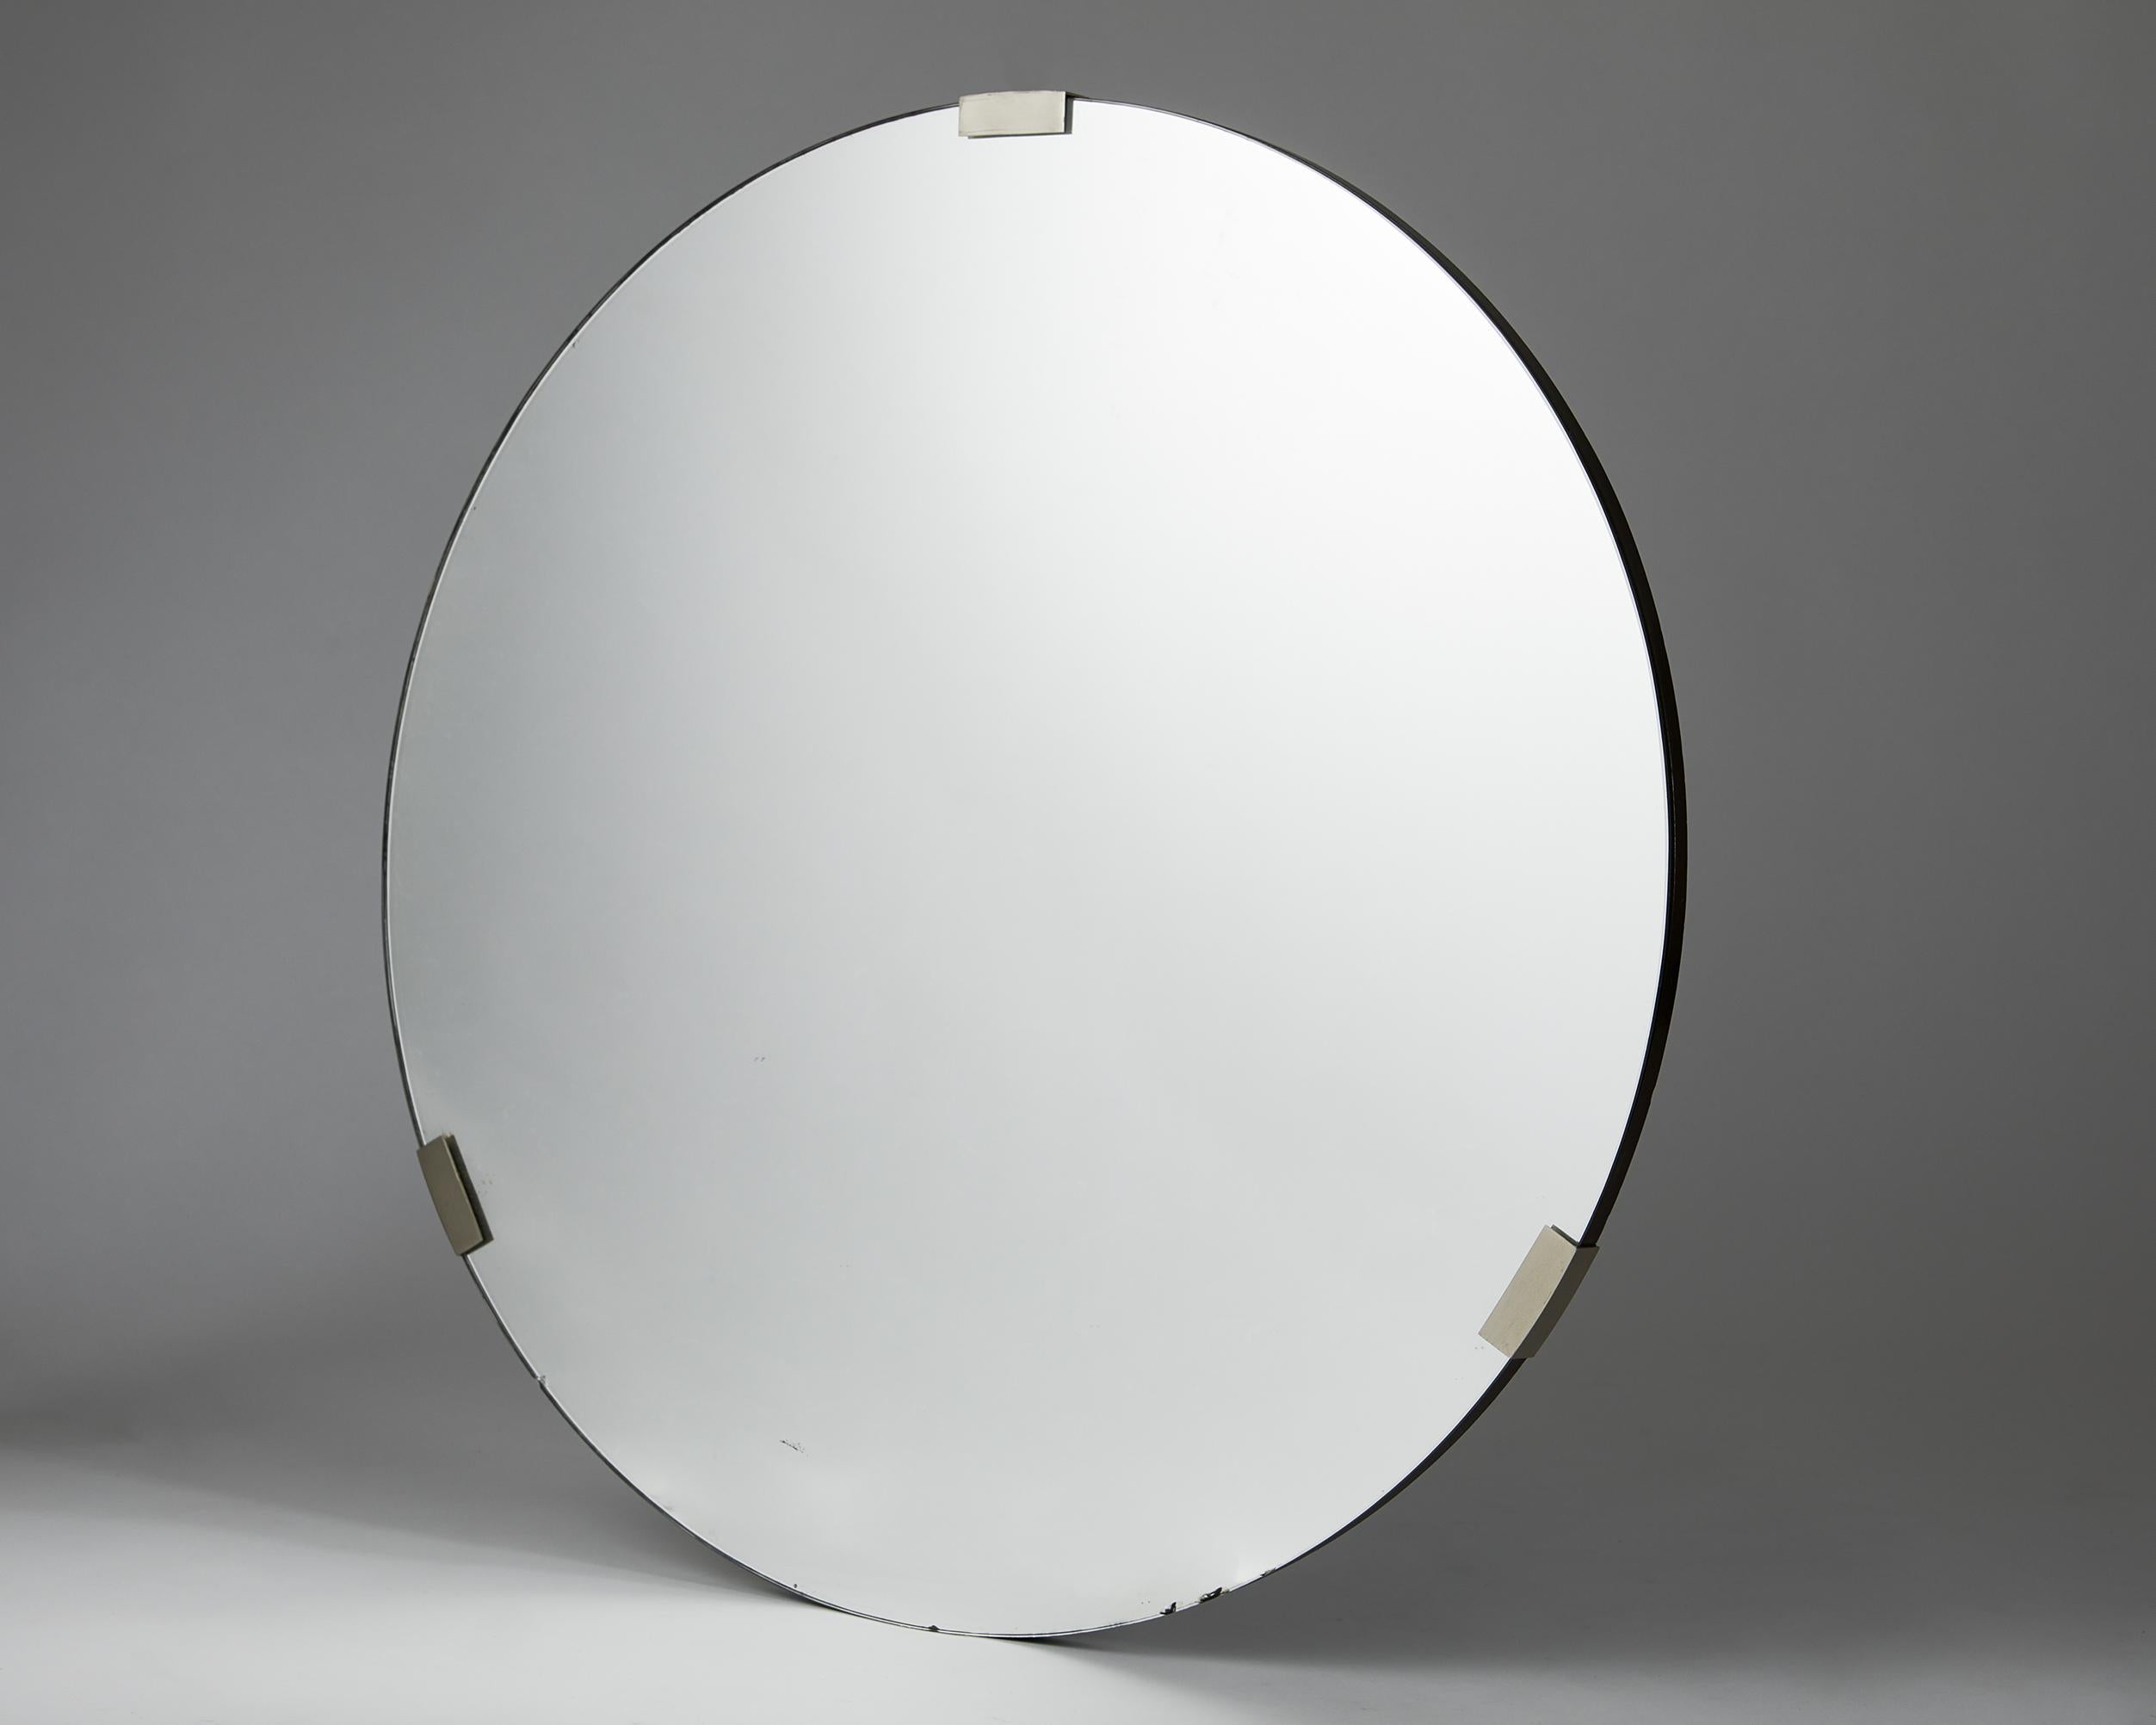 Mirror model “record” designed by Axel Einar Hjorth,
Sweden, 1930.

Brushed steel and mirrored glass.

Dimensions:
W: 90 cm 
D: 3 cm 